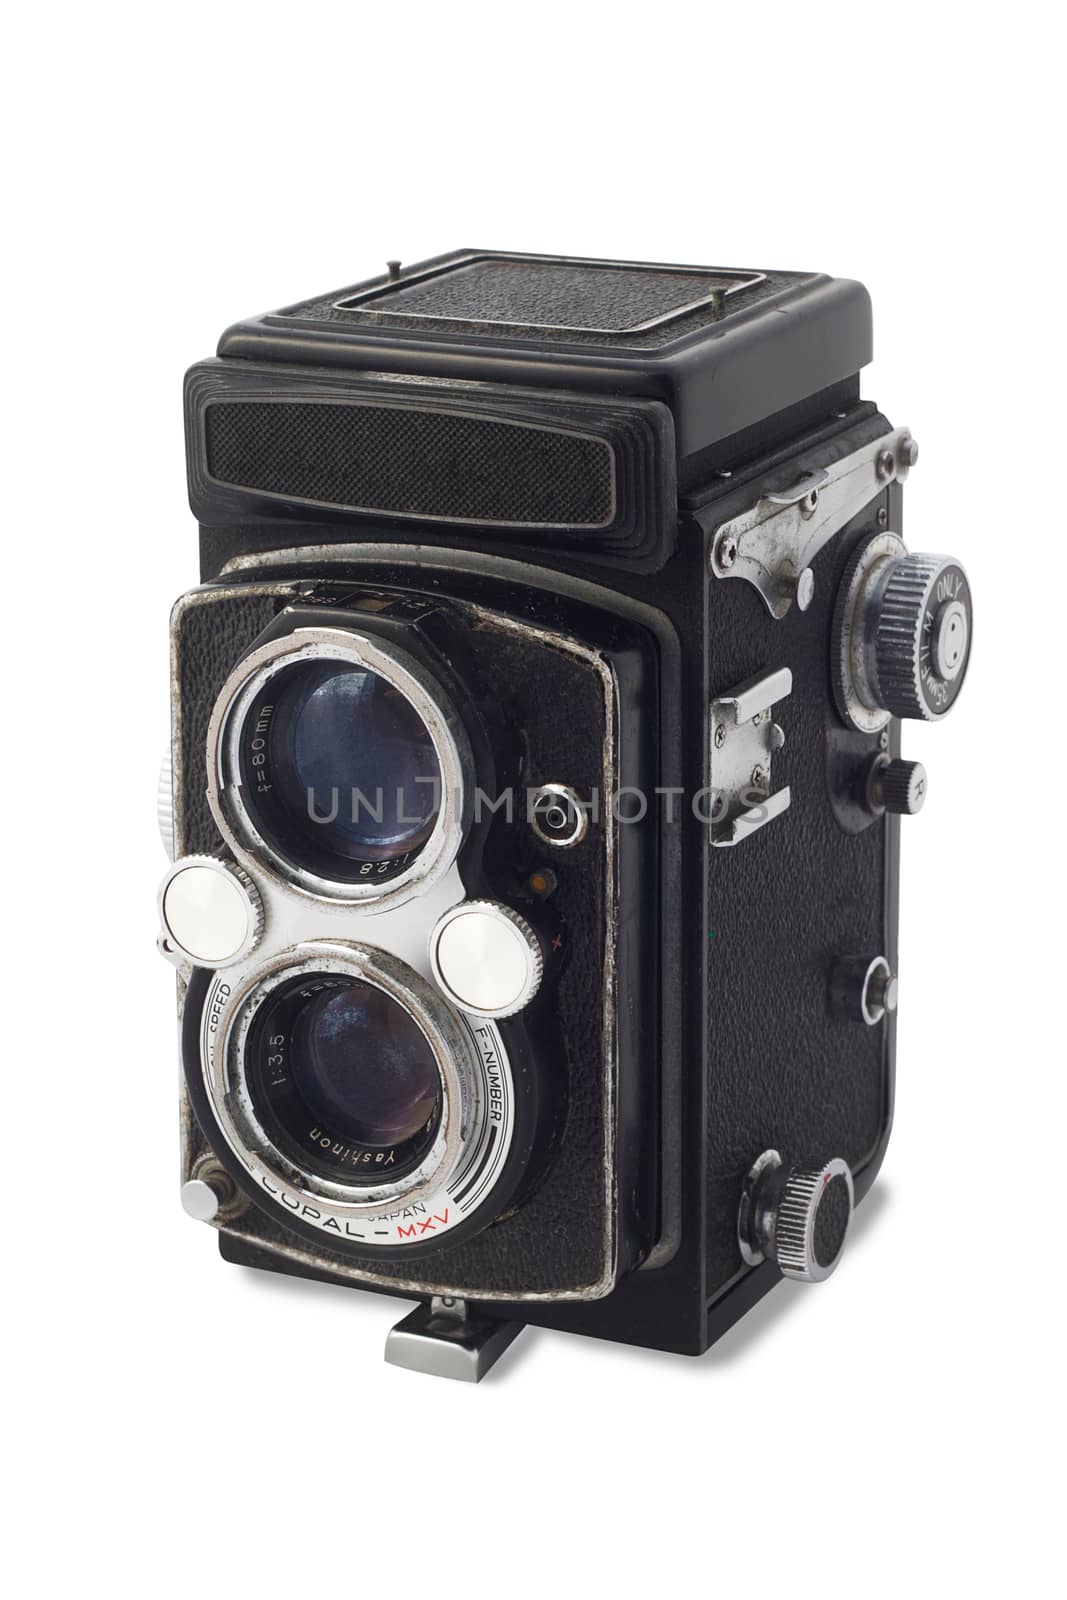 Vintage twin-lens reflex old camera isolated on white background with clipping path